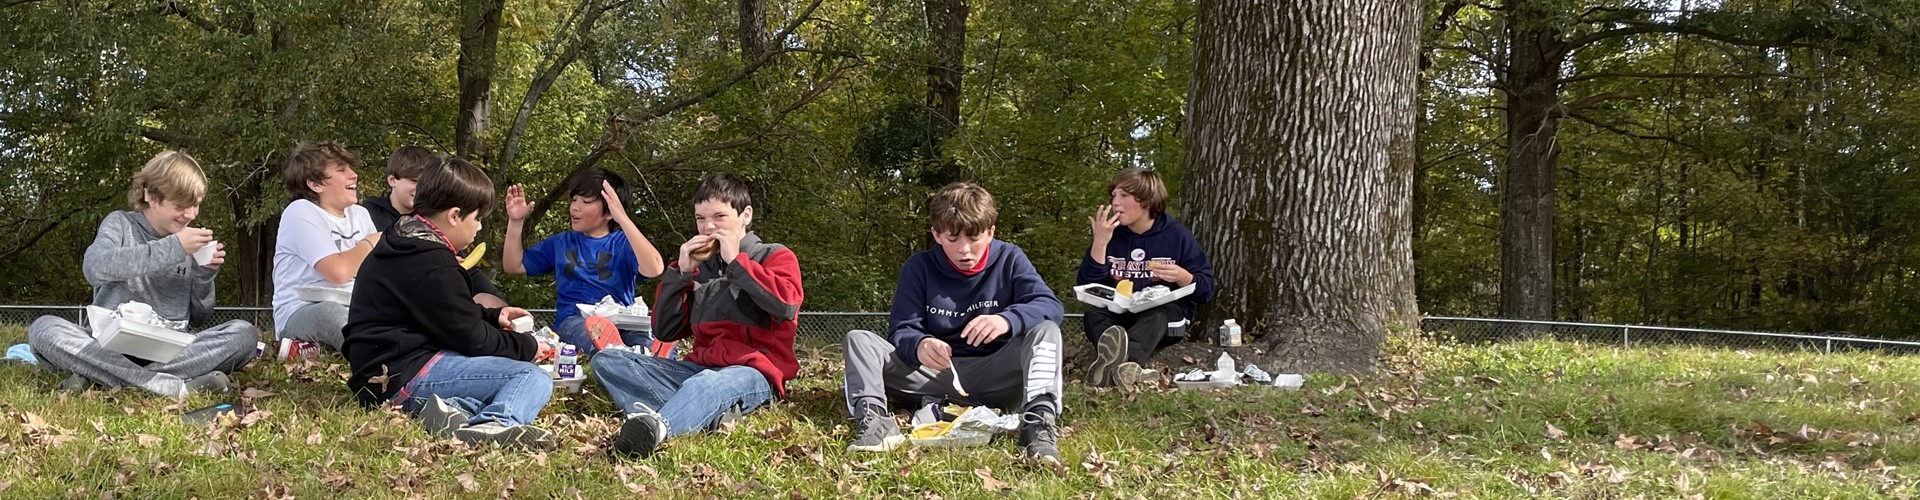 Boys eating lunch as a group on the grass under trees